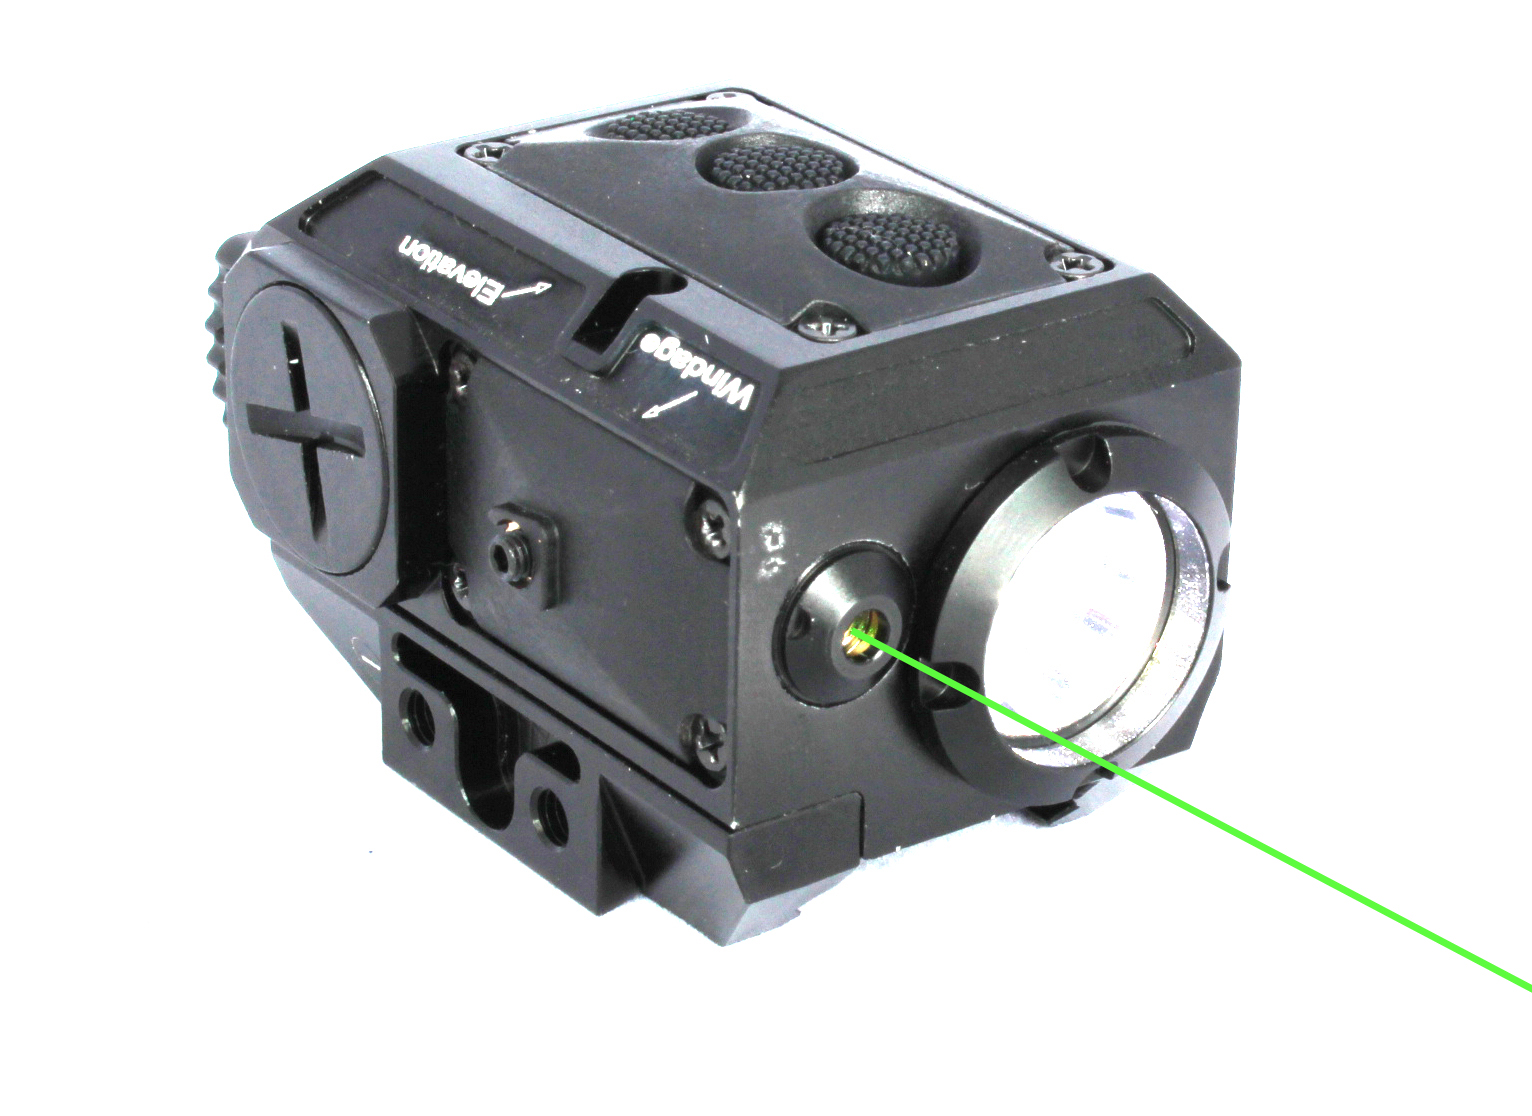 New compact square tactical green laser sight and strobe 200 lumen CREE Q5 LED light combo (FDA certified)